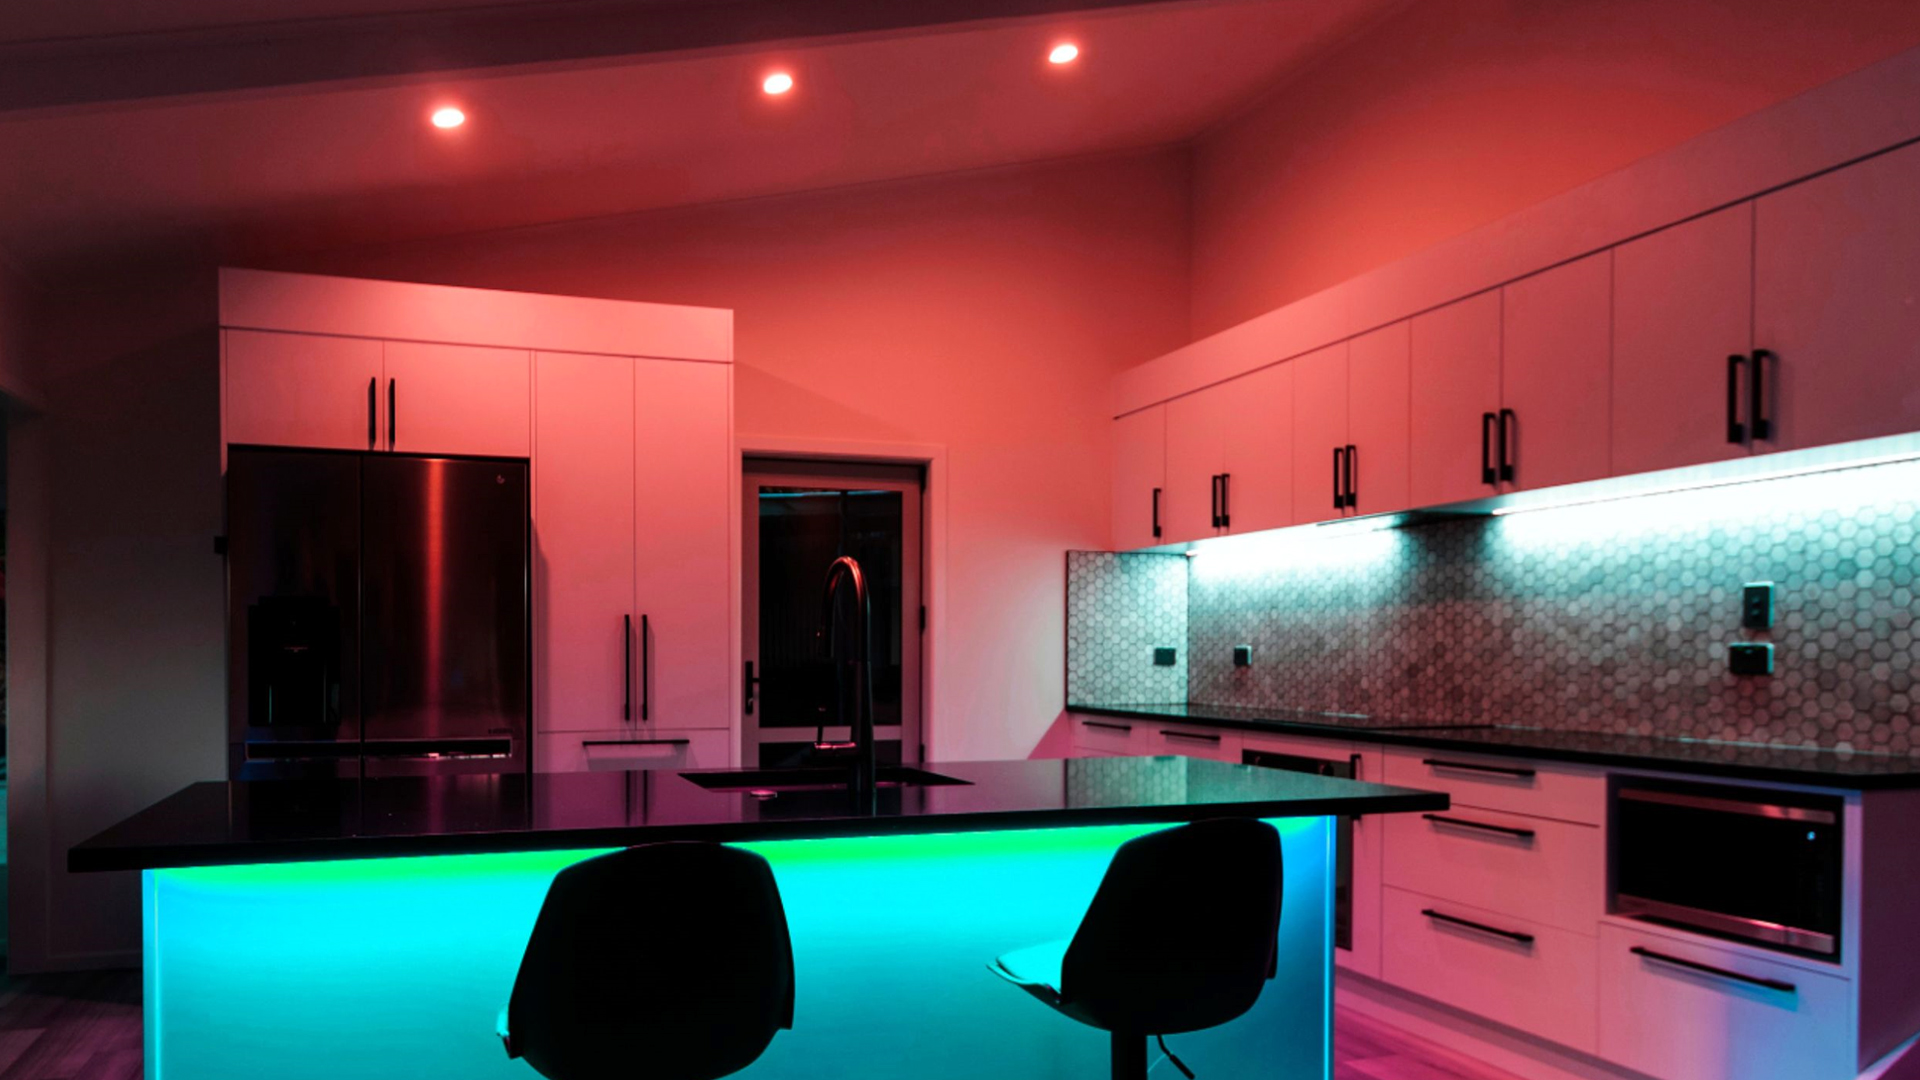 A kitchen illuminated with light strips and Lifx smart bulbs